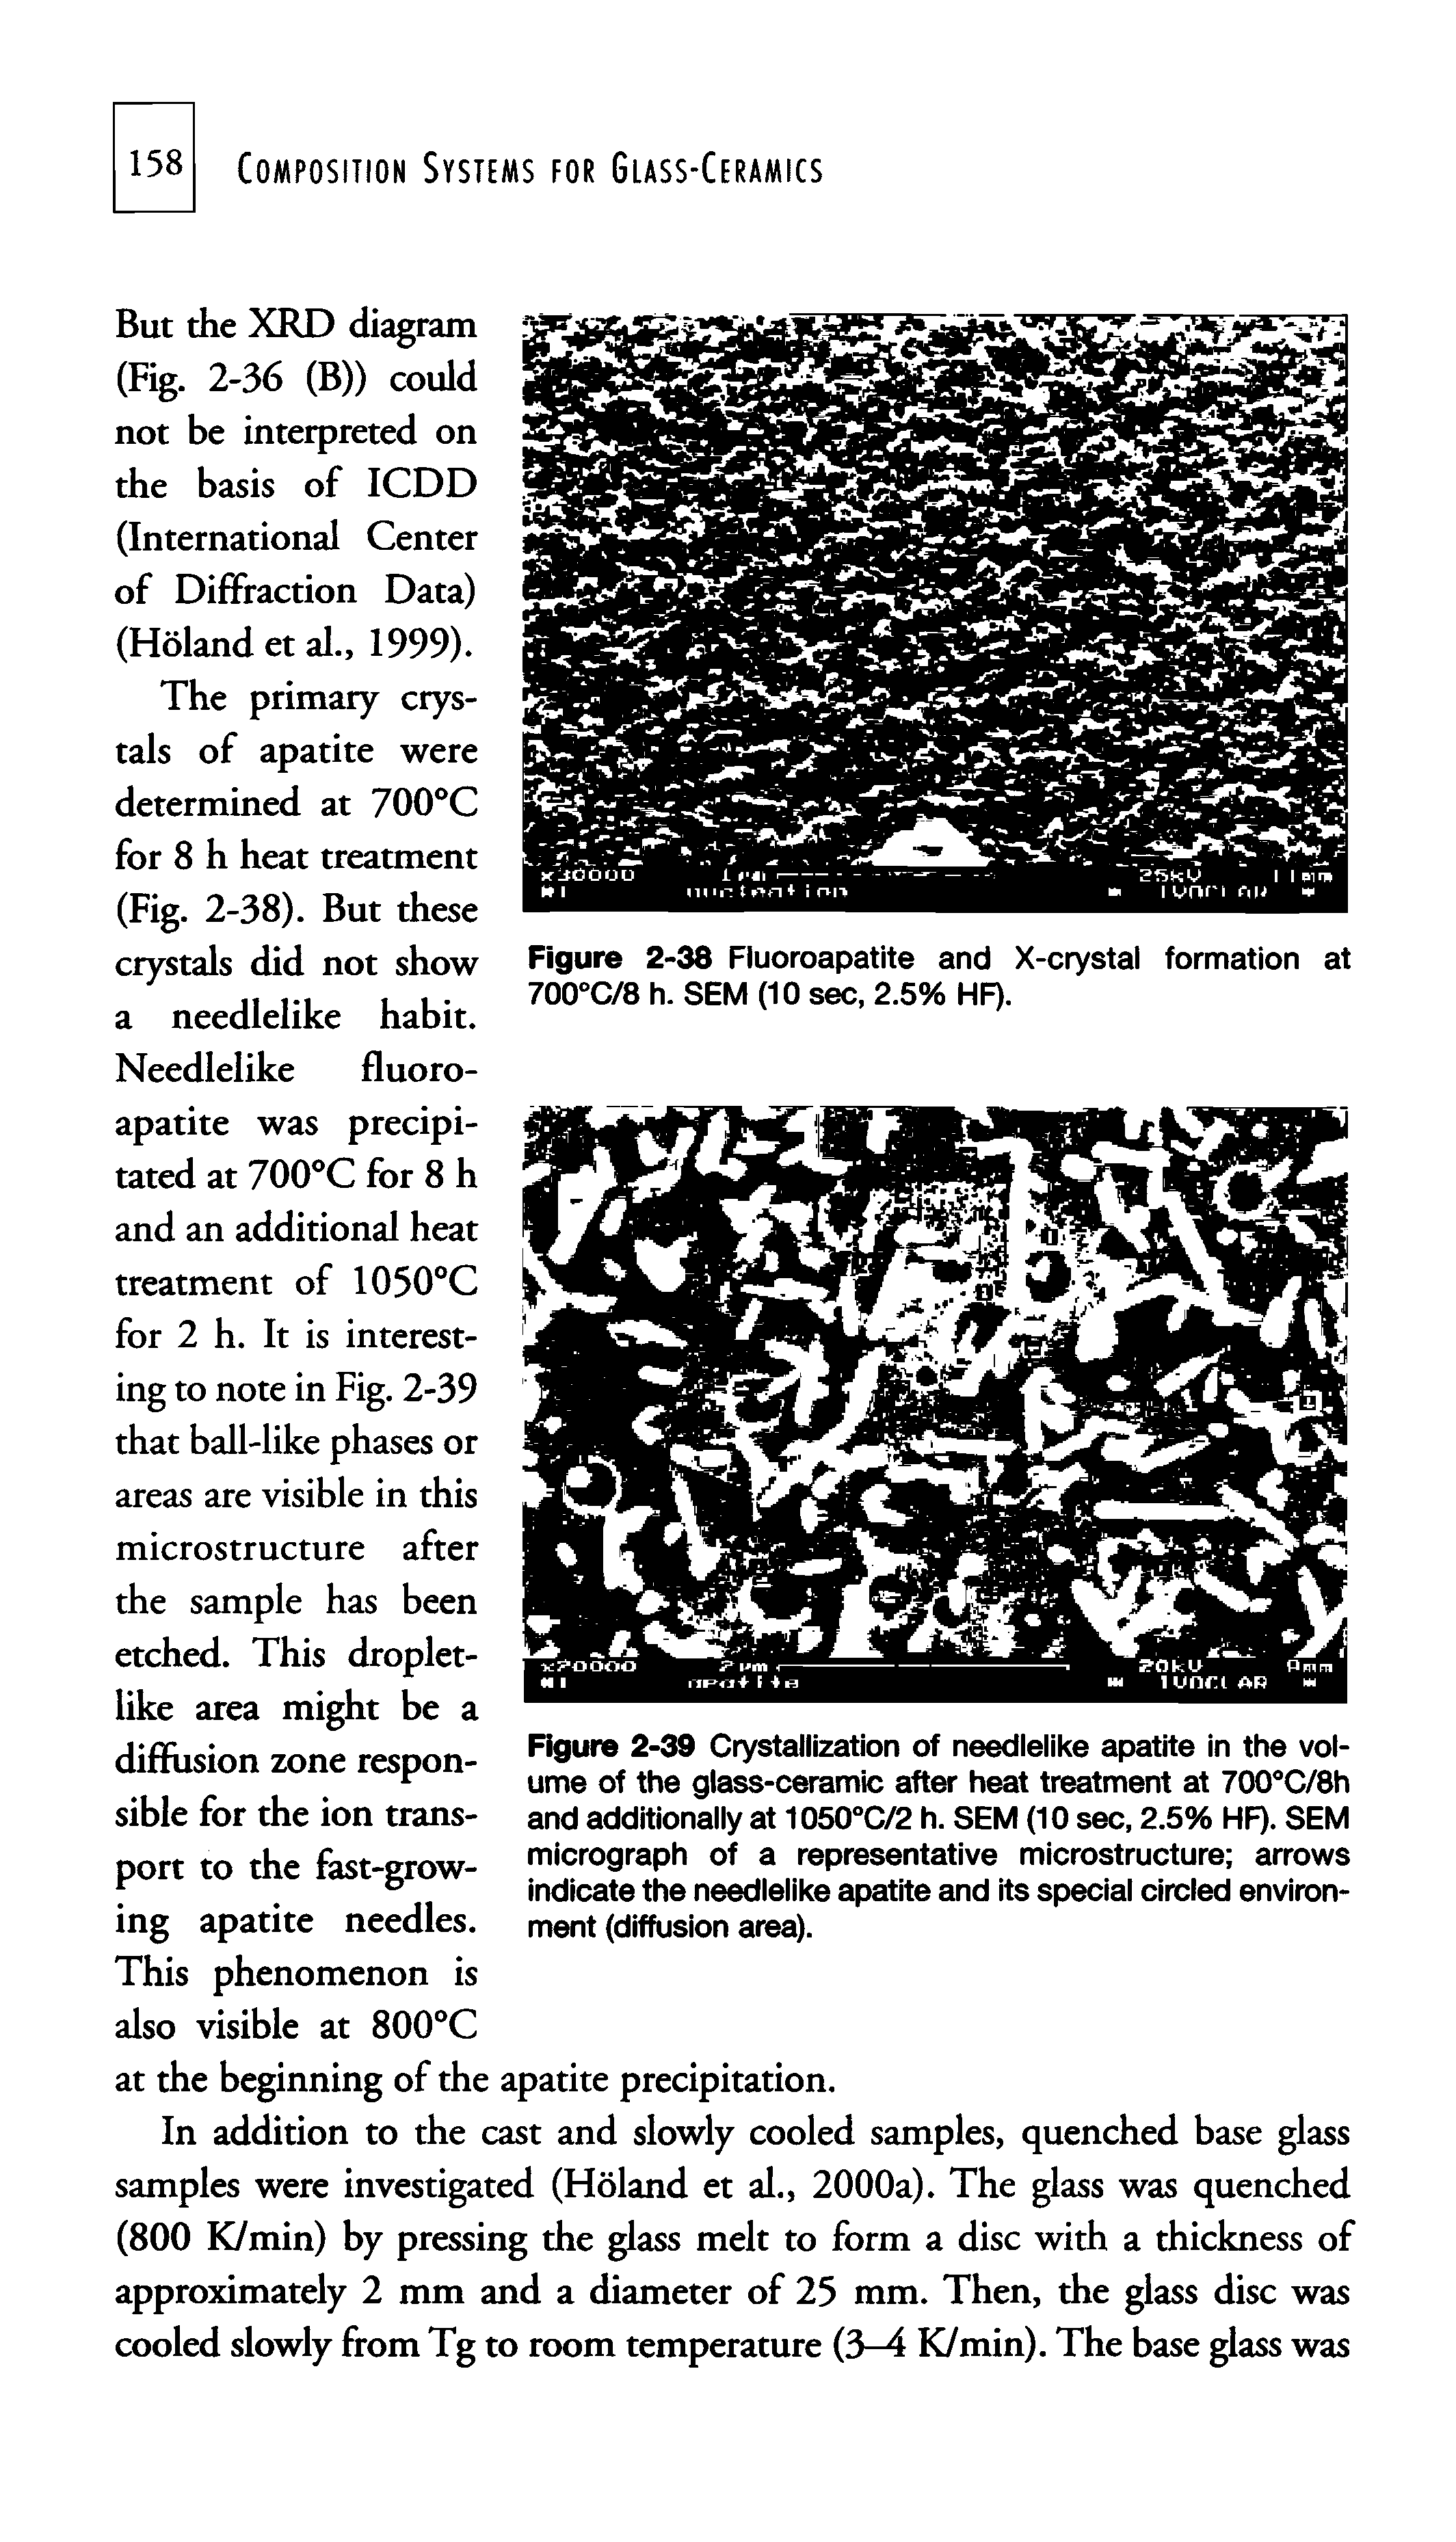 Figure 2-38 Crystallization of needlelike apatite in the volume of the glass-ceramic after heat treatment at 700 C/8h aixl additionally at 1050°C h. SEM (10 sec, 2.5% HF). SEM micrograph of a representative microstructure arrows indicate the needlelike apatite and its special circled environment (diffusion area).